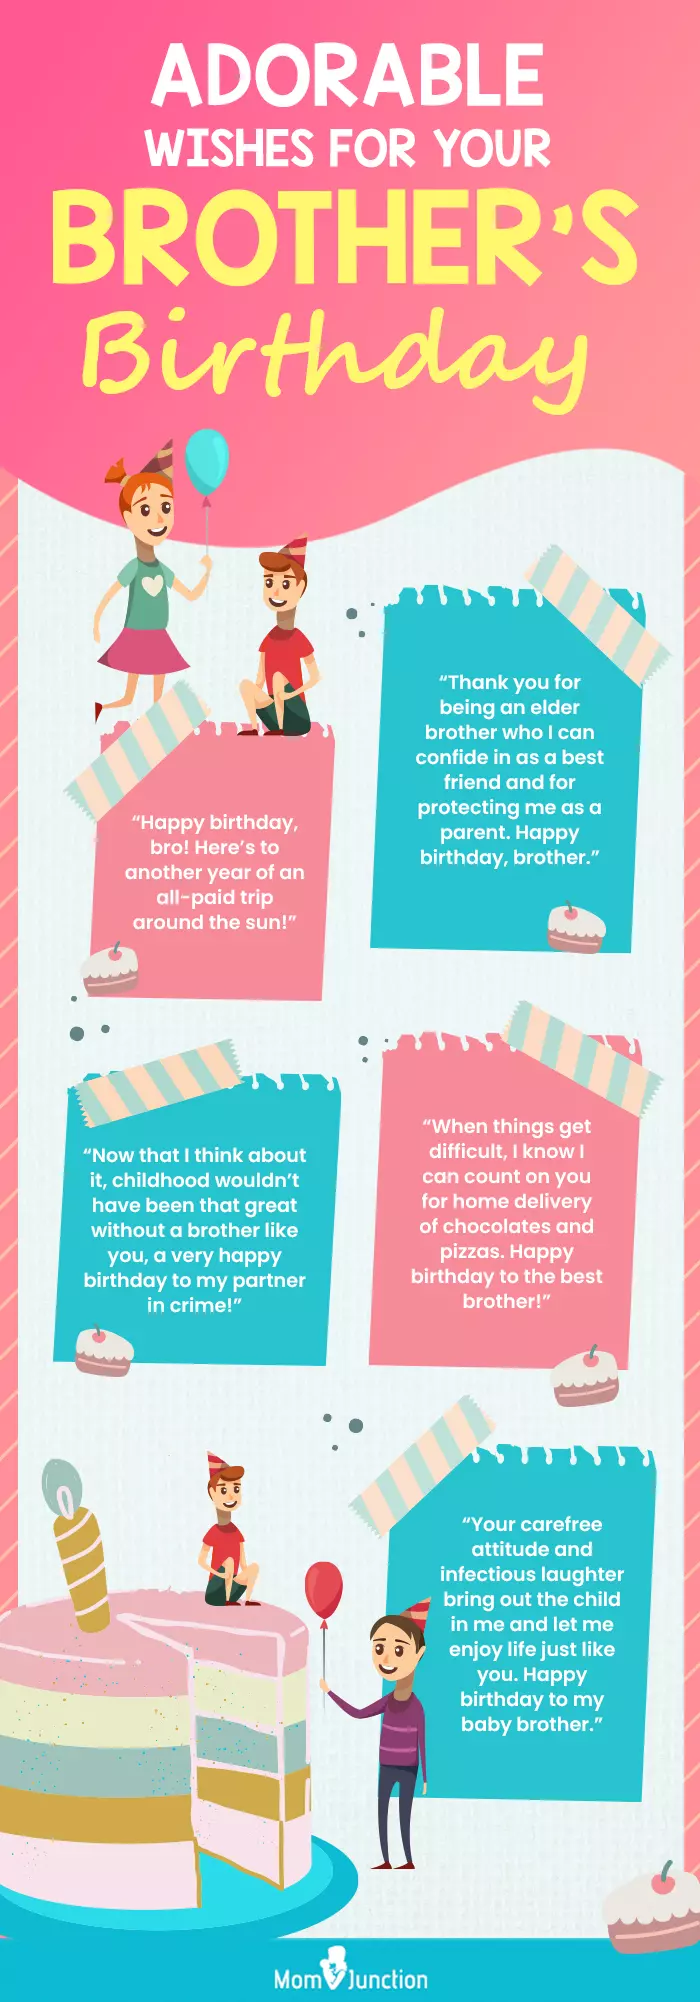 adorable wishes for your brothers birthday (infographic)